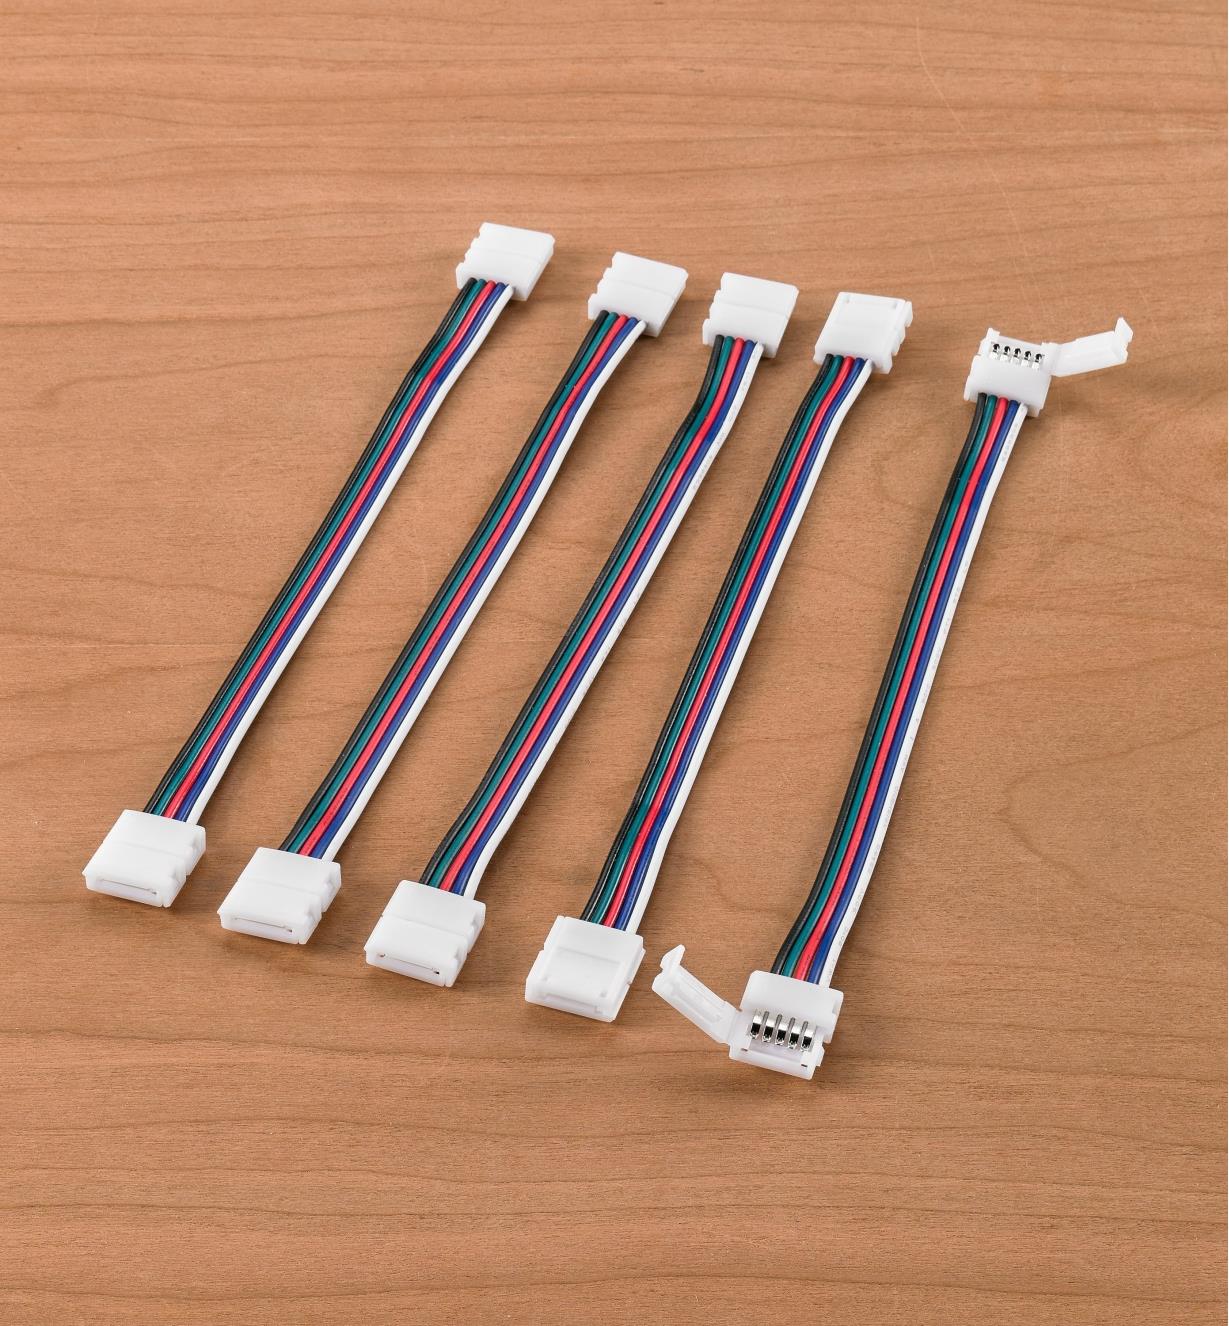 6"" Wire-Lead Connectors for RGB+W LED Tape Lights